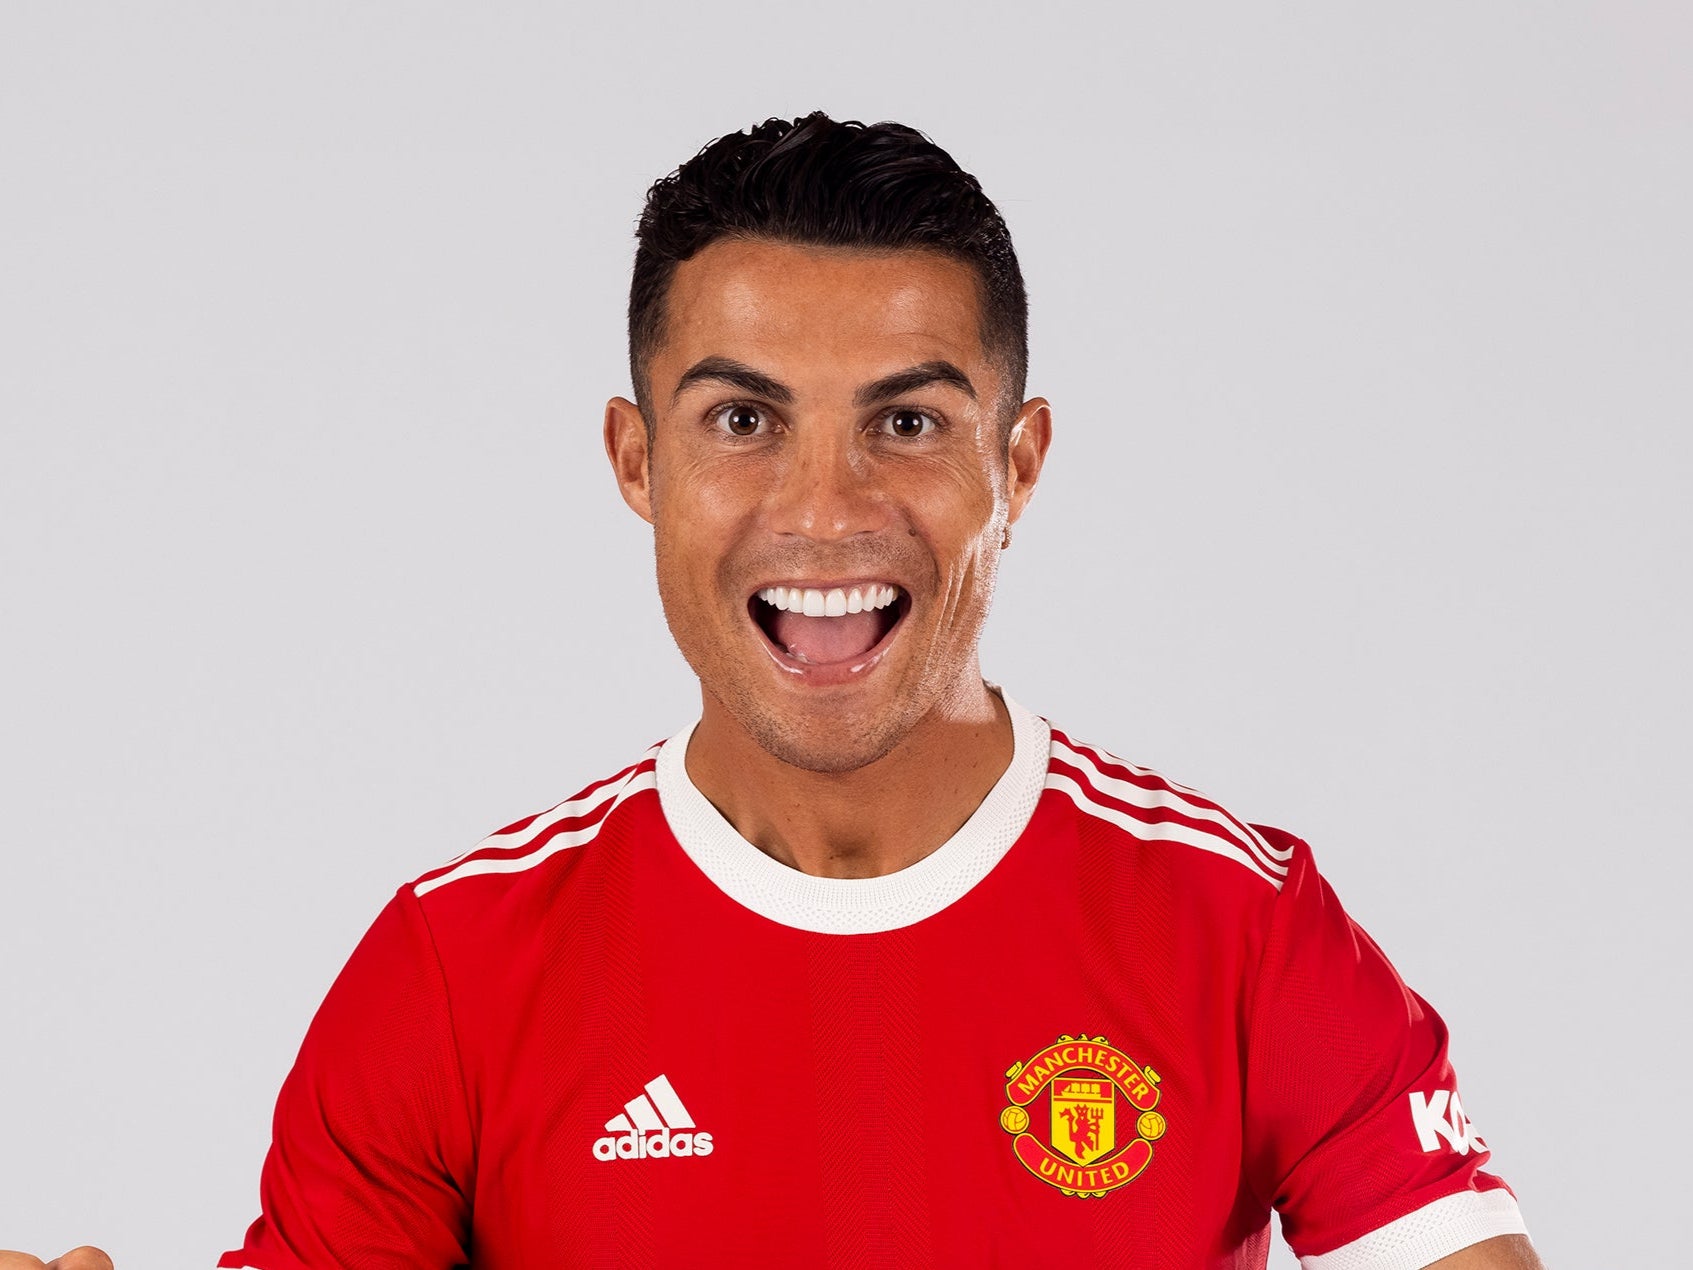 Cristiano Ronaldo of Manchester United poses after signing for the club